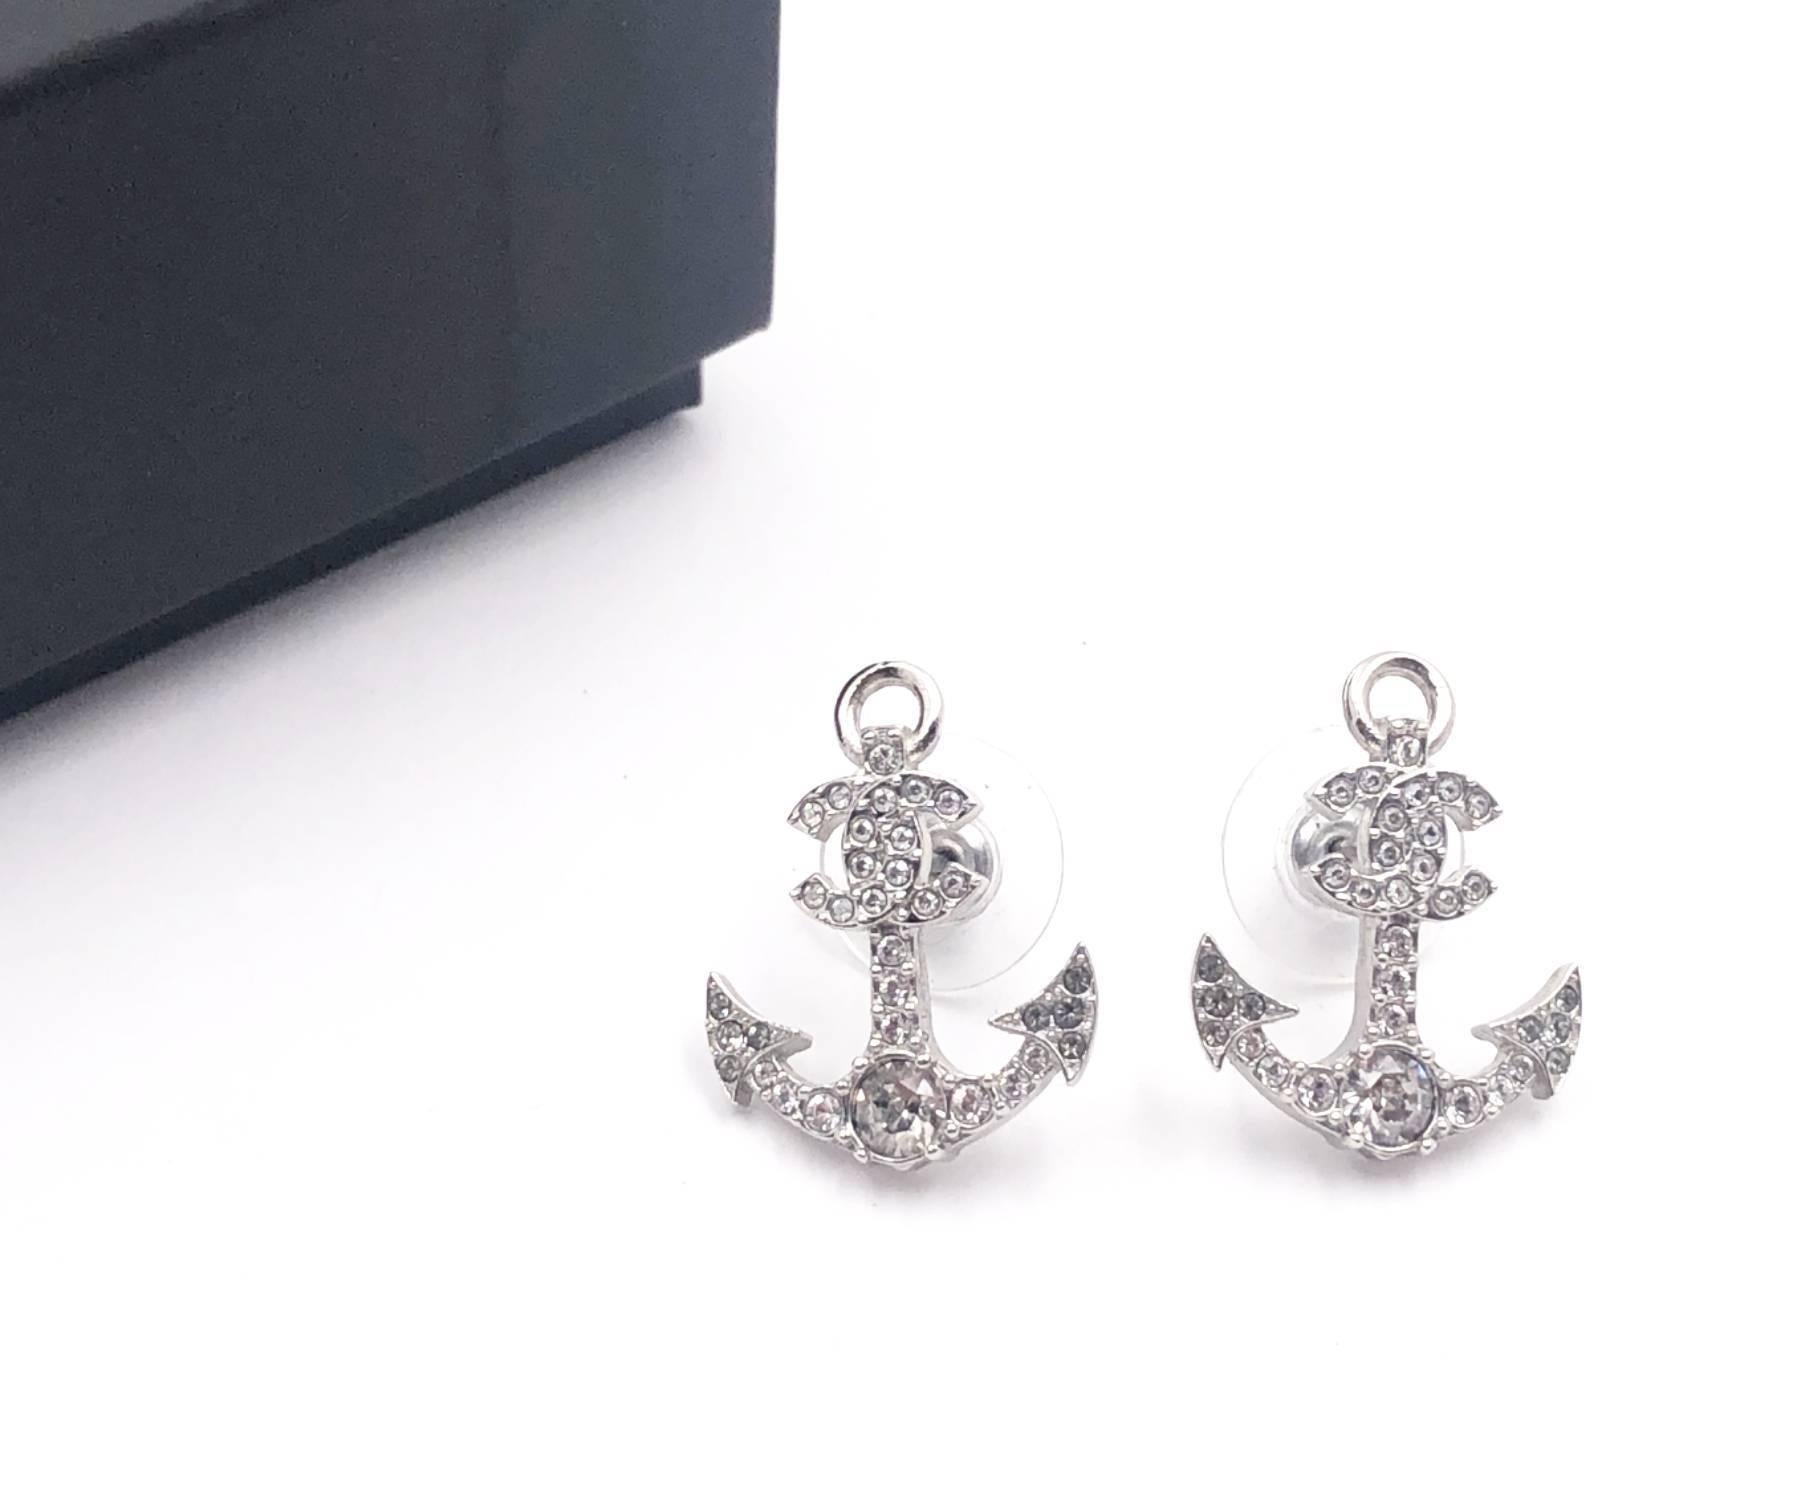 Chanel Silver CC Crystal Anchor Piercing Earrings

*Marked in18
*Made in italy
*Comes with the original box and pouch

-Approximately 1